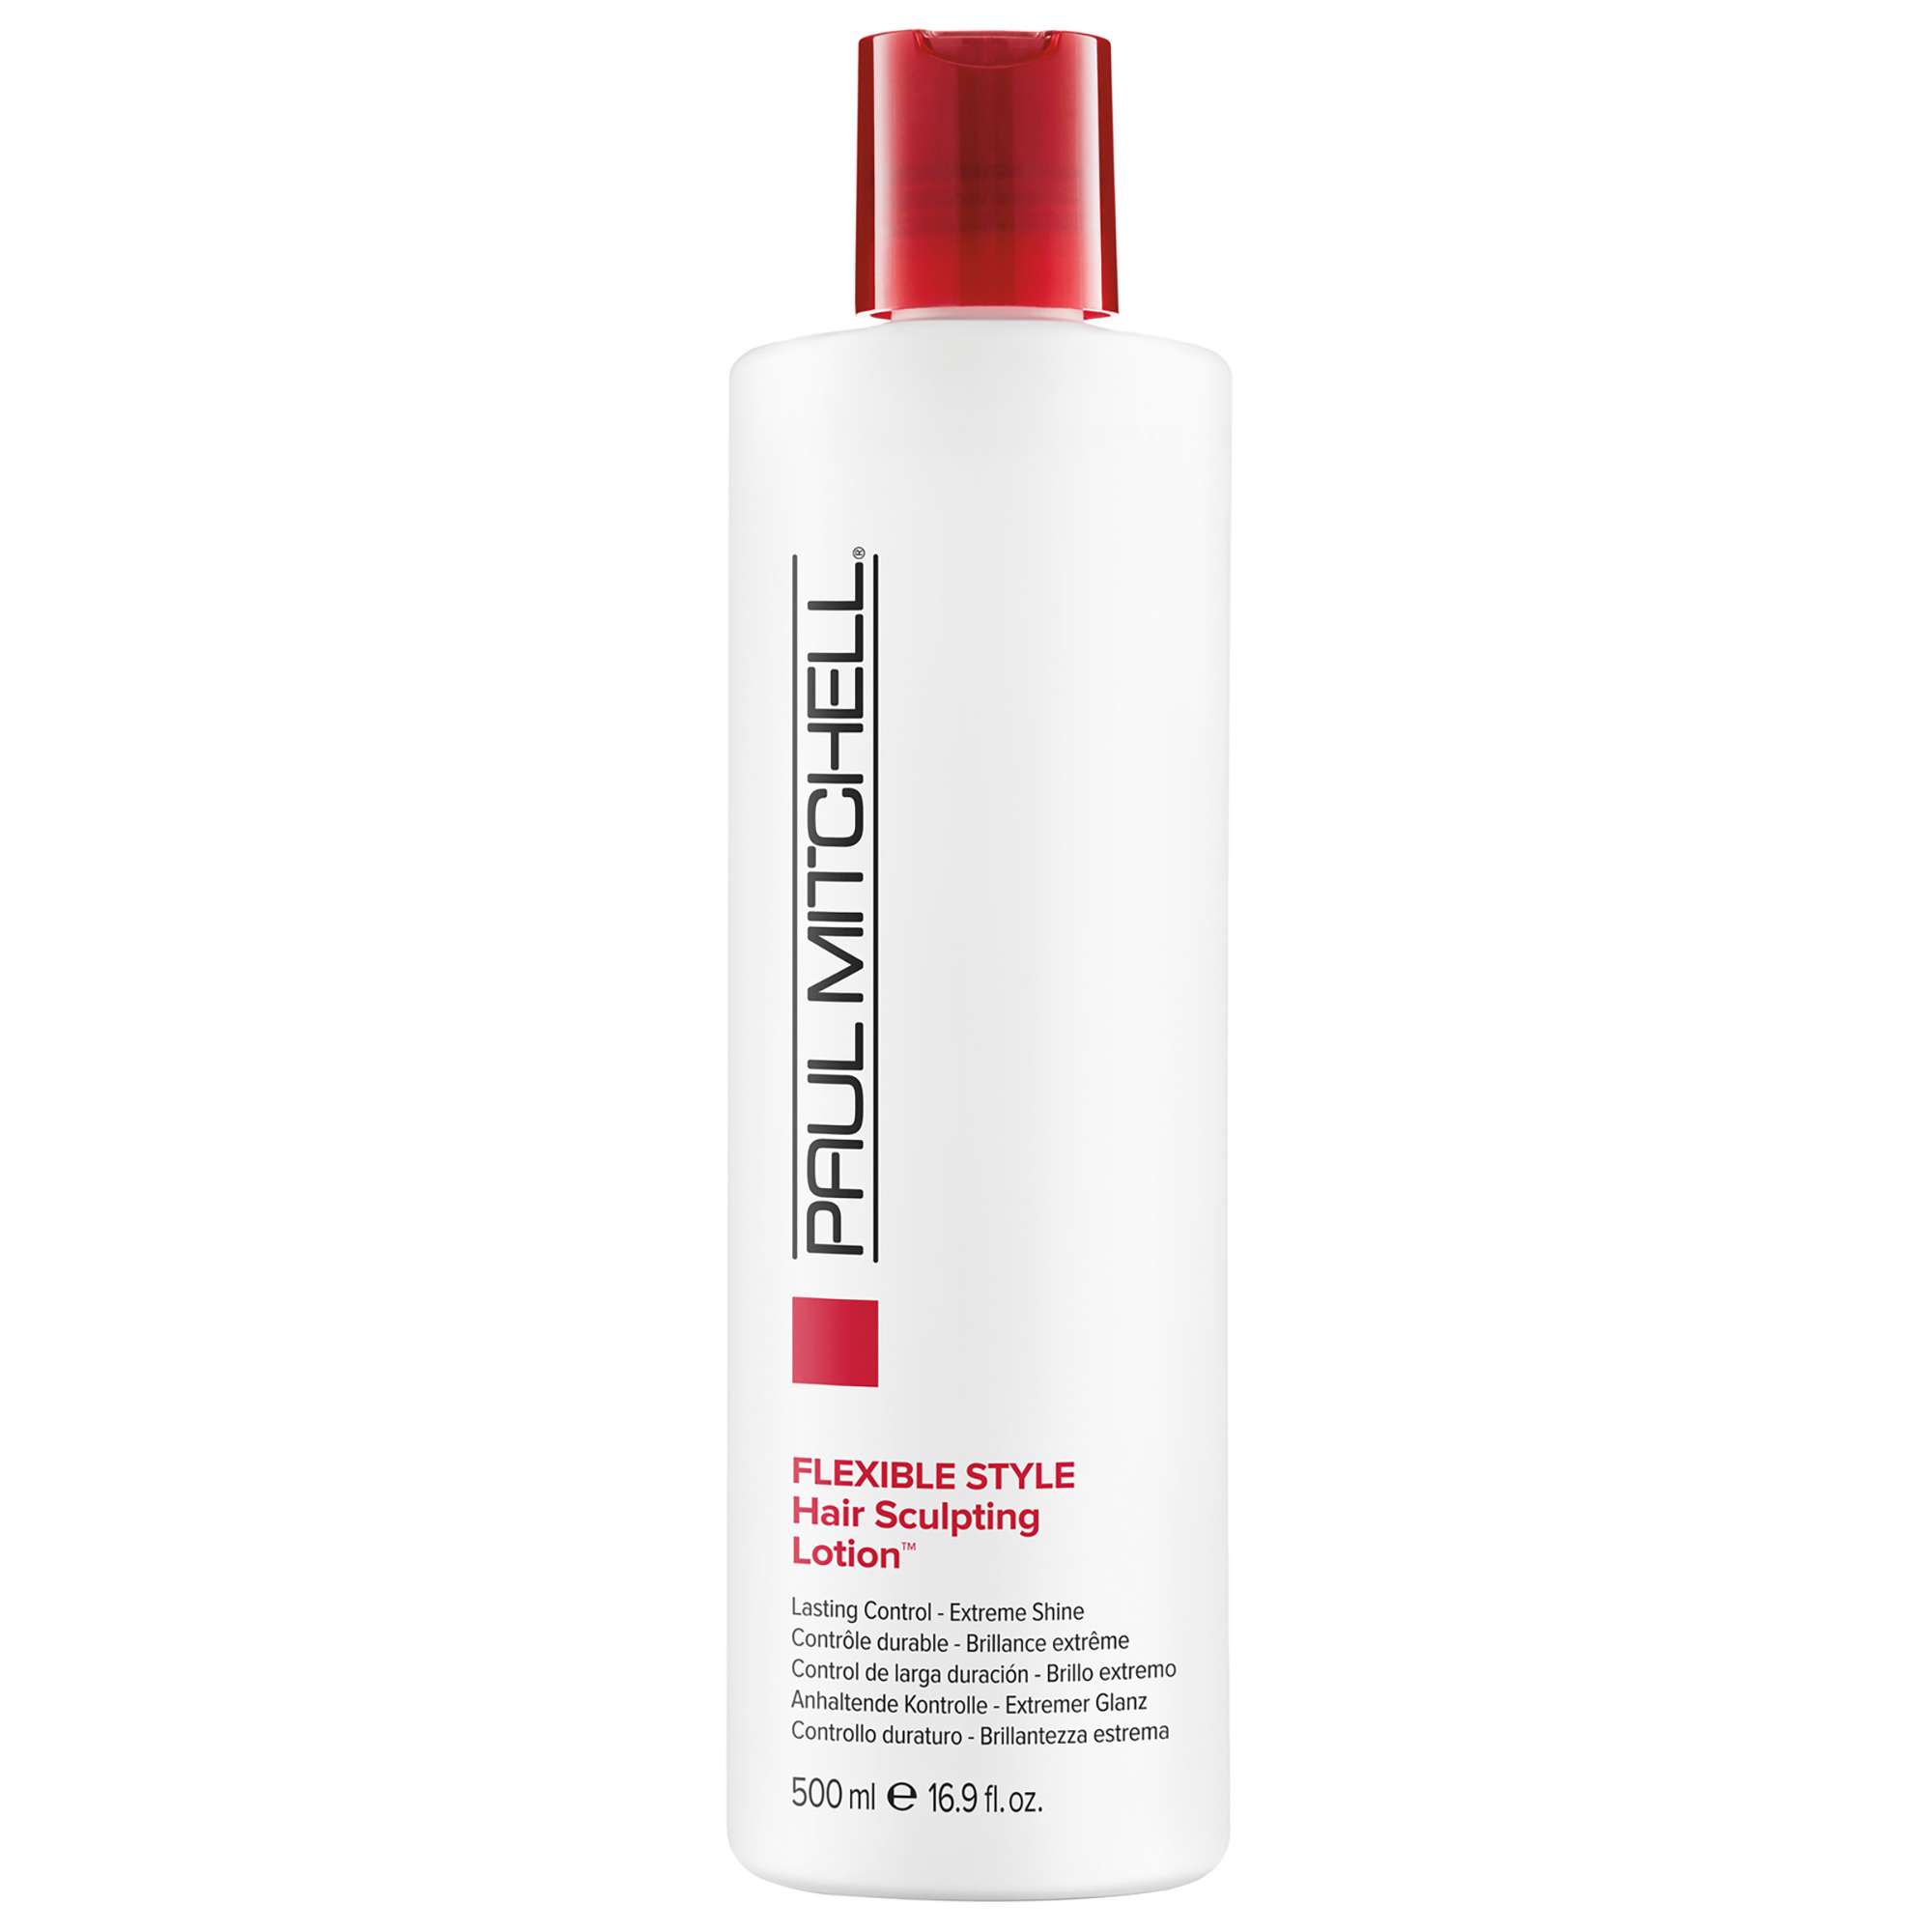 Image of Paul Mitchell Flexible Style Hair Sculpting Lotion 500ml